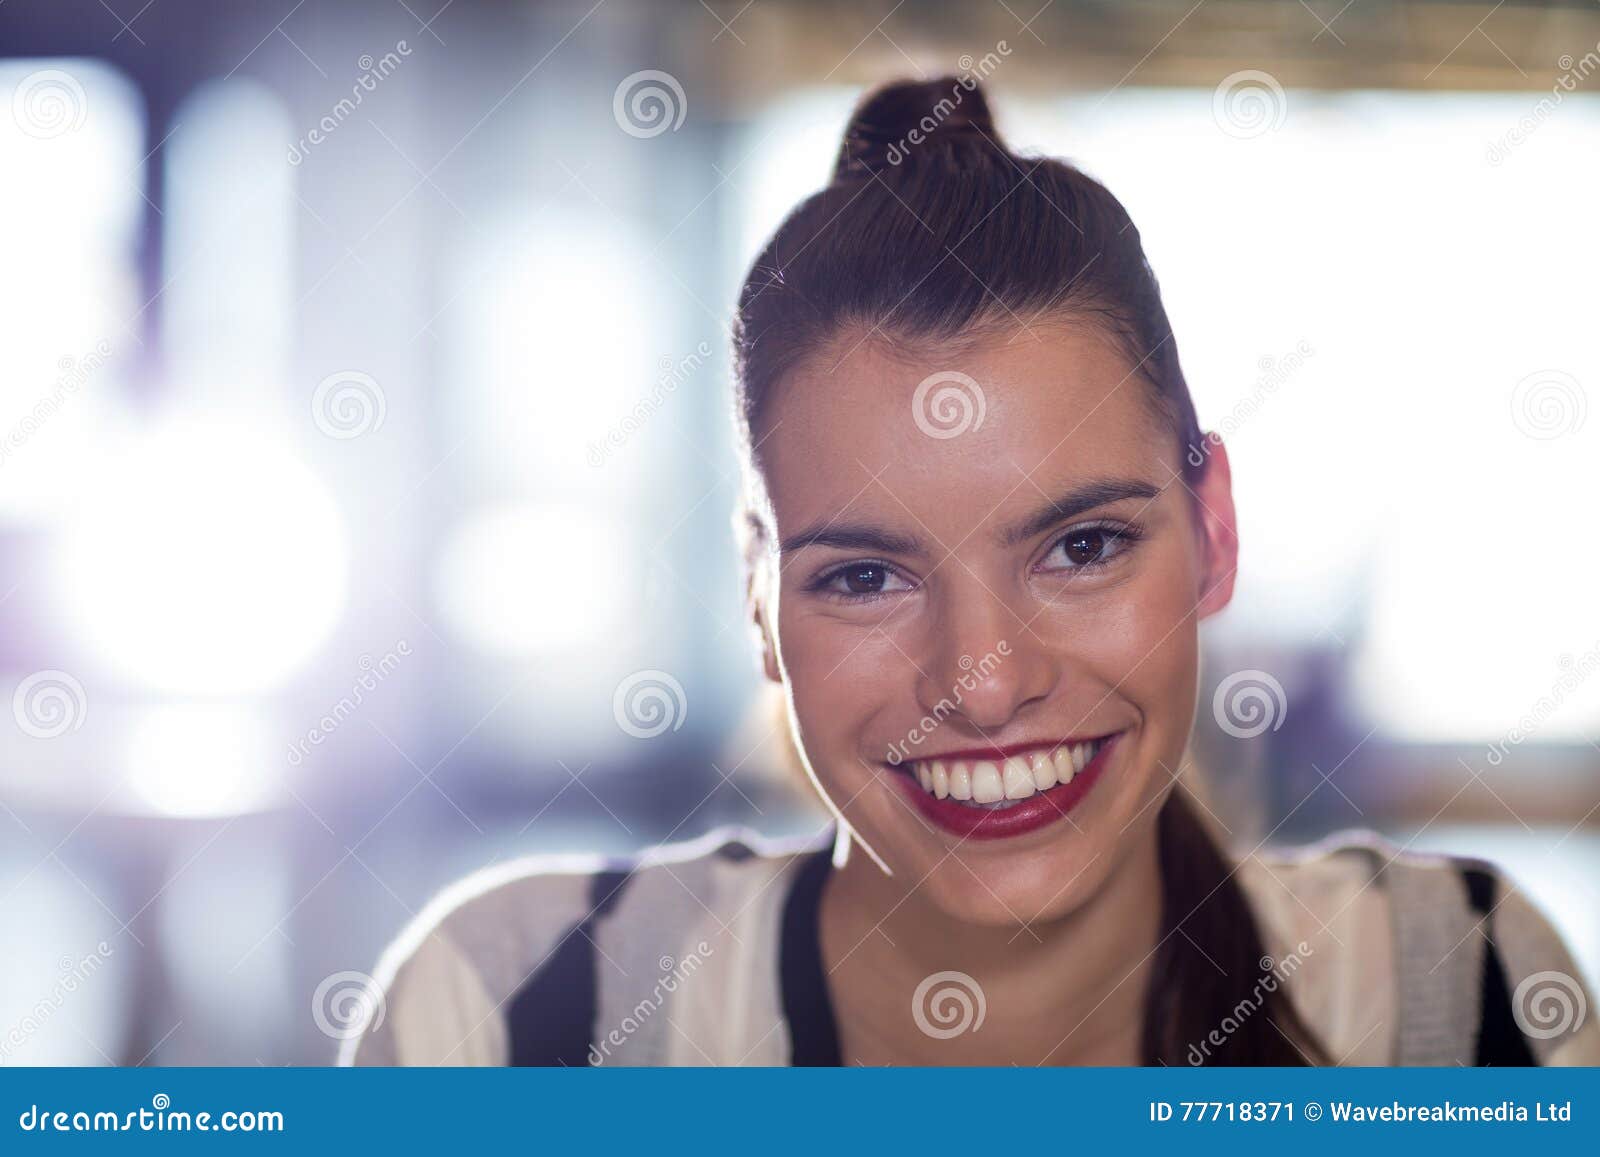 Portrait of Woman in Office Stock Image - Image of elegant, profession ...